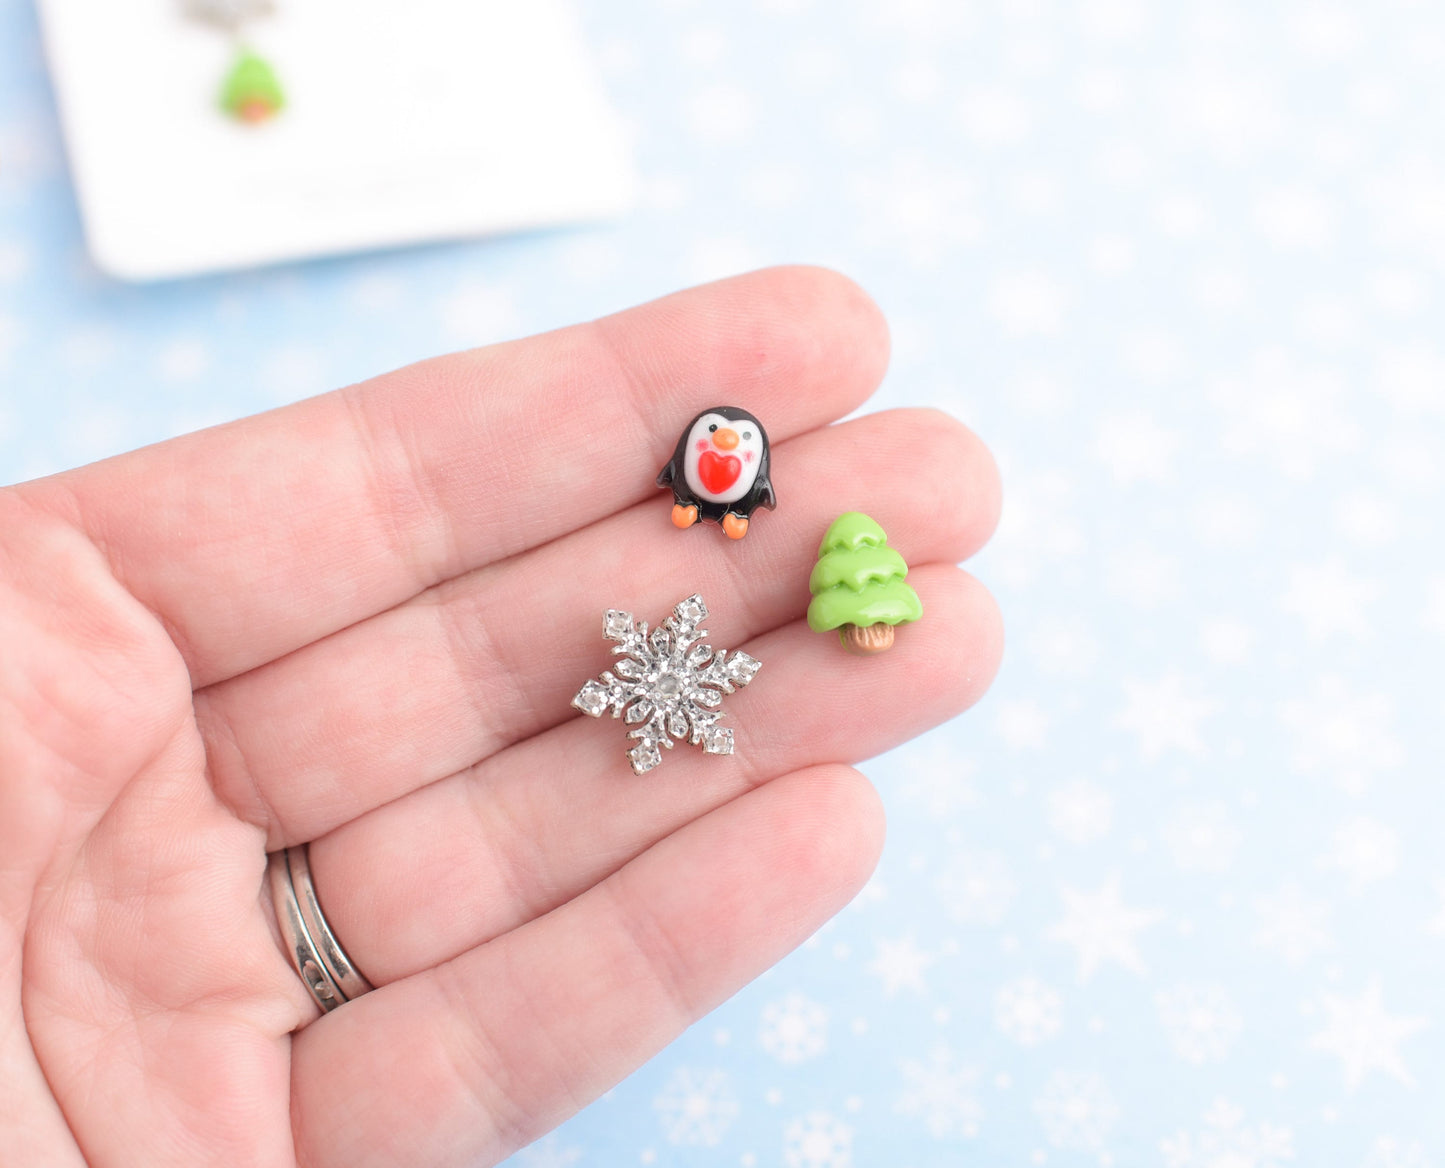 Winter Holiday Earring Trio with Titanum Posts- Penguin Heart, Snowflake, and Pine Tree